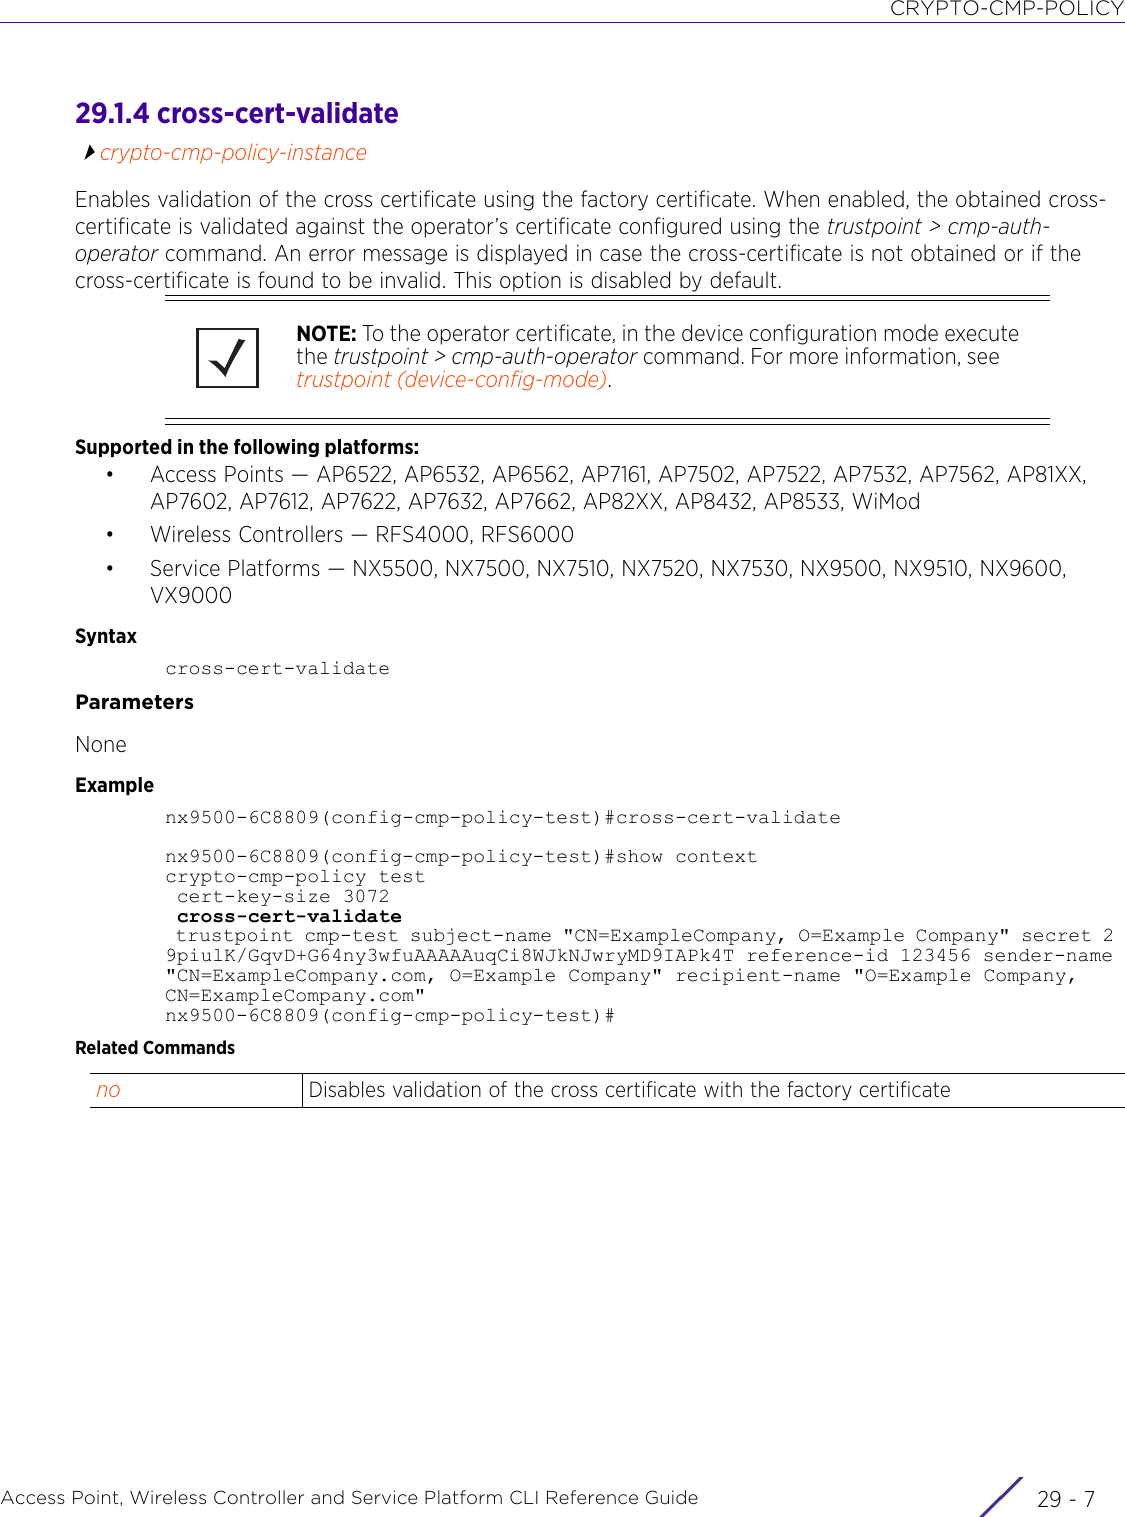 CRYPTO-CMP-POLICYAccess Point, Wireless Controller and Service Platform CLI Reference Guide 29 - 729.1.4 cross-cert-validatecrypto-cmp-policy-instanceEnables validation of the cross certificate using the factory certificate. When enabled, the obtained cross-certificate is validated against the operator’s certificate configured using the trustpoint &gt; cmp-auth-operator command. An error message is displayed in case the cross-certificate is not obtained or if the cross-certificate is found to be invalid. This option is disabled by default.Supported in the following platforms:• Access Points — AP6522, AP6532, AP6562, AP7161, AP7502, AP7522, AP7532, AP7562, AP81XX, AP7602, AP7612, AP7622, AP7632, AP7662, AP82XX, AP8432, AP8533, WiMod• Wireless Controllers — RFS4000, RFS6000• Service Platforms — NX5500, NX7500, NX7510, NX7520, NX7530, NX9500, NX9510, NX9600, VX9000Syntaxcross-cert-validateParametersNoneExamplenx9500-6C8809(config-cmp-policy-test)#cross-cert-validatenx9500-6C8809(config-cmp-policy-test)#show contextcrypto-cmp-policy test cert-key-size 3072 cross-cert-validate trustpoint cmp-test subject-name &quot;CN=ExampleCompany, O=Example Company&quot; secret 2 9piulK/GqvD+G64ny3wfuAAAAAuqCi8WJkNJwryMD9IAPk4T reference-id 123456 sender-name &quot;CN=ExampleCompany.com, O=Example Company&quot; recipient-name &quot;O=Example Company, CN=ExampleCompany.com&quot;nx9500-6C8809(config-cmp-policy-test)#Related CommandsNOTE: To the operator certificate, in the device configuration mode execute the trustpoint &gt; cmp-auth-operator command. For more information, see trustpoint (device-config-mode).no Disables validation of the cross certificate with the factory certificate